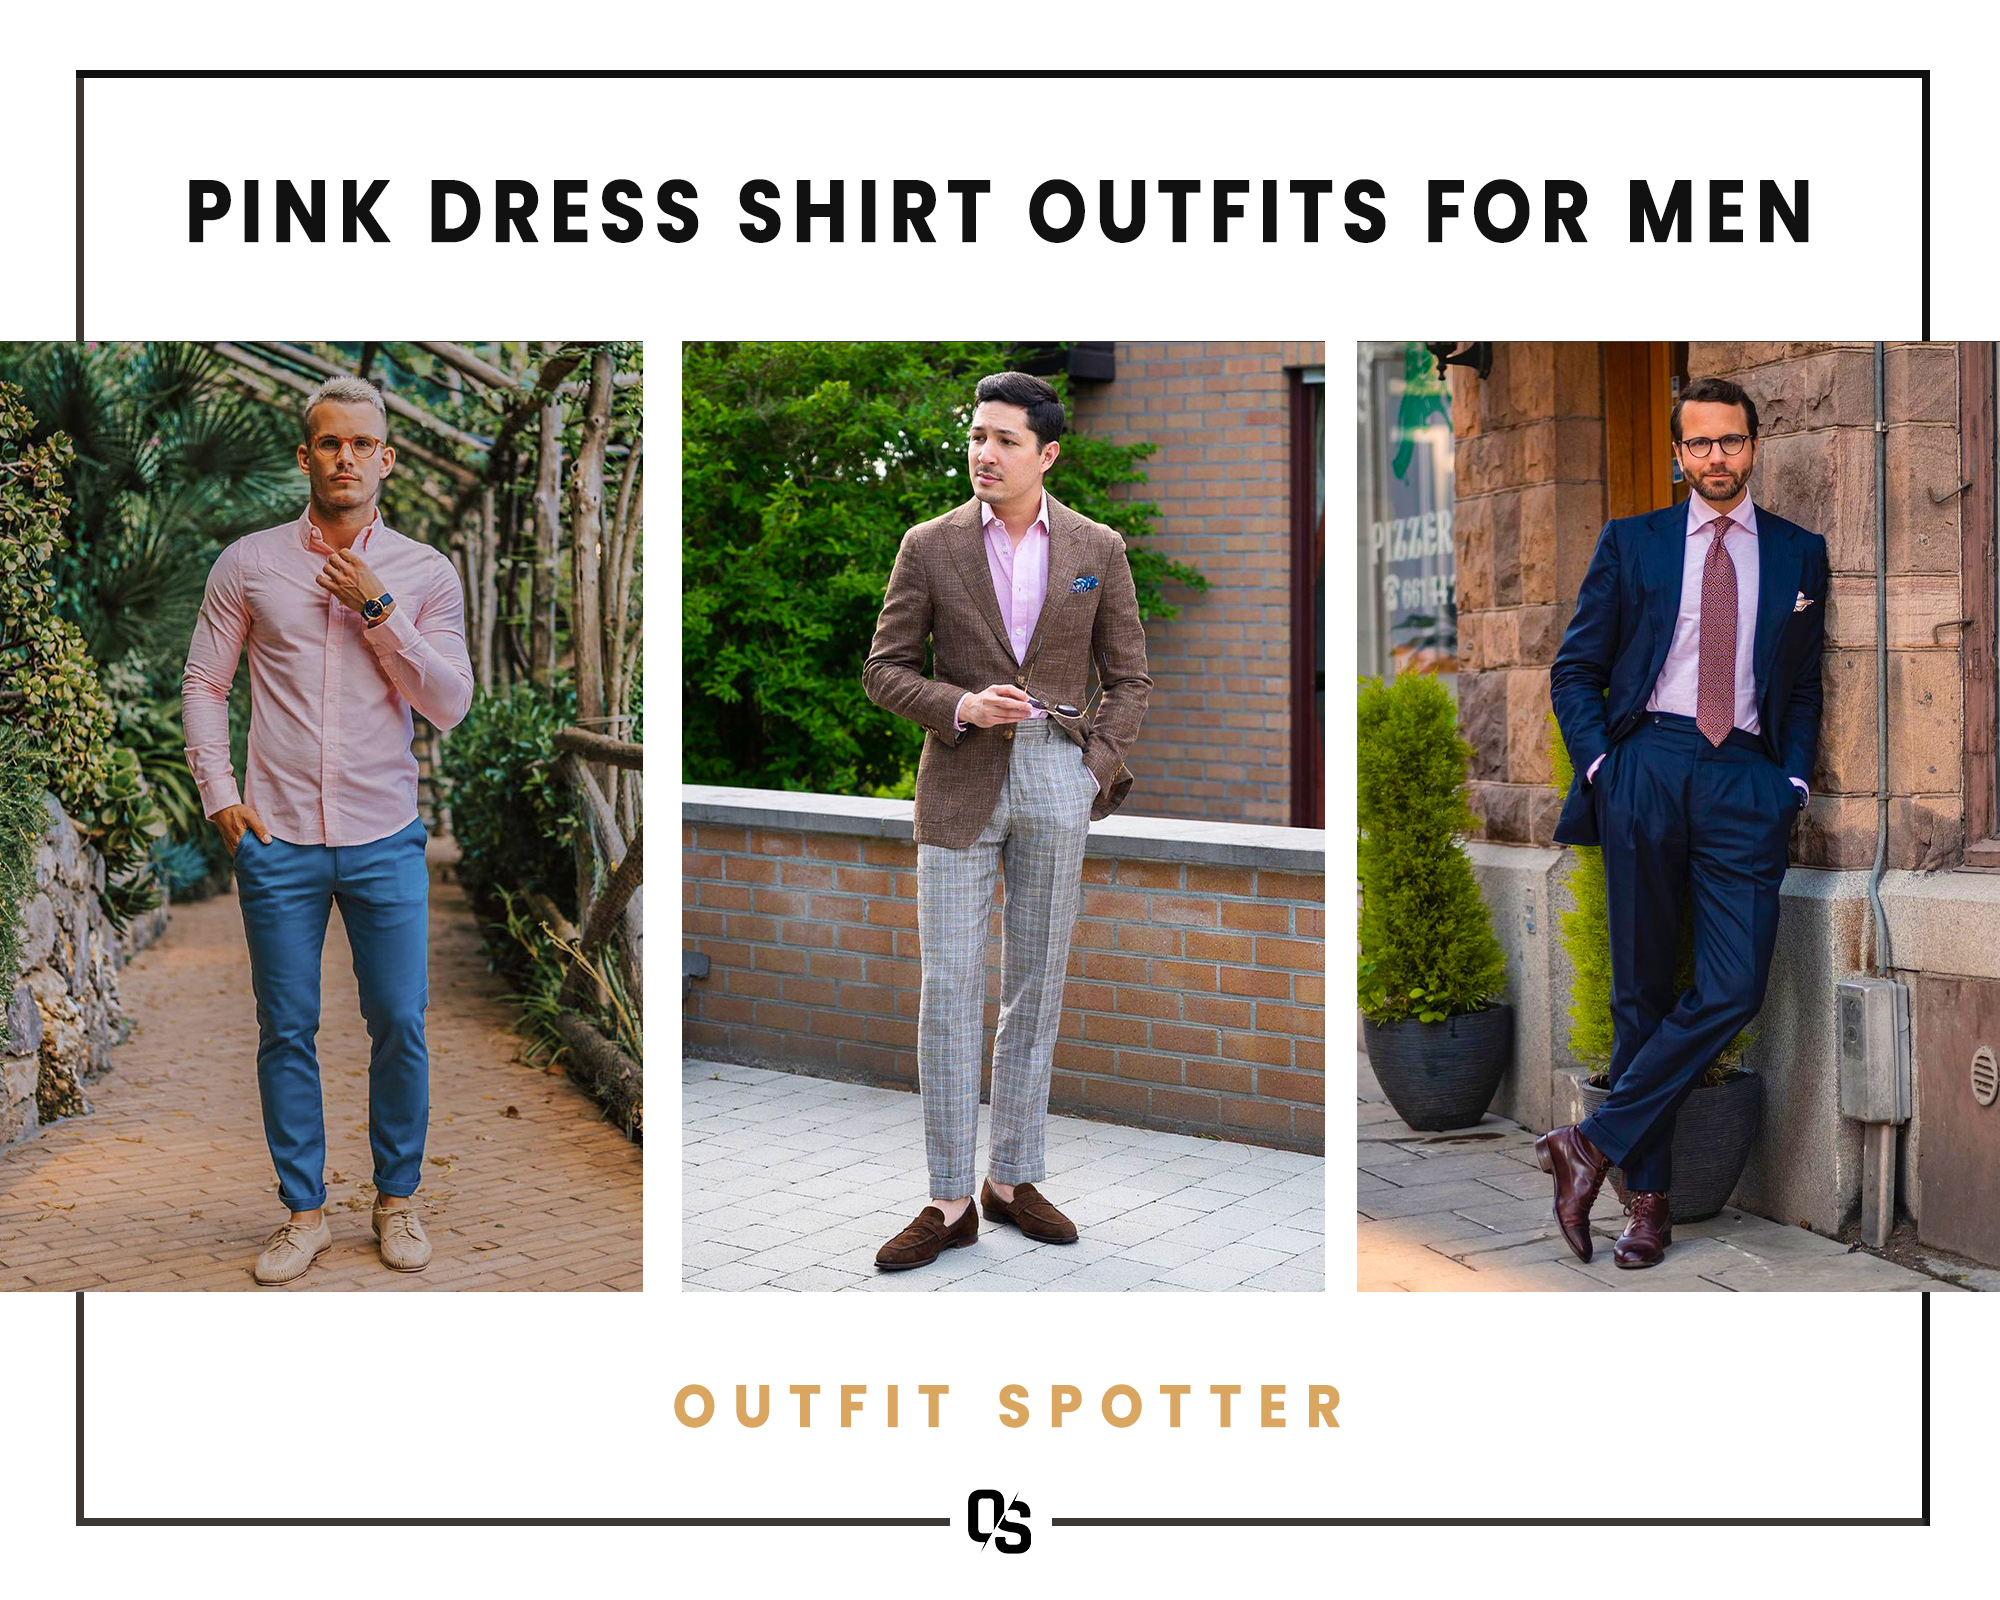 Different pink dress shirt outfits for men